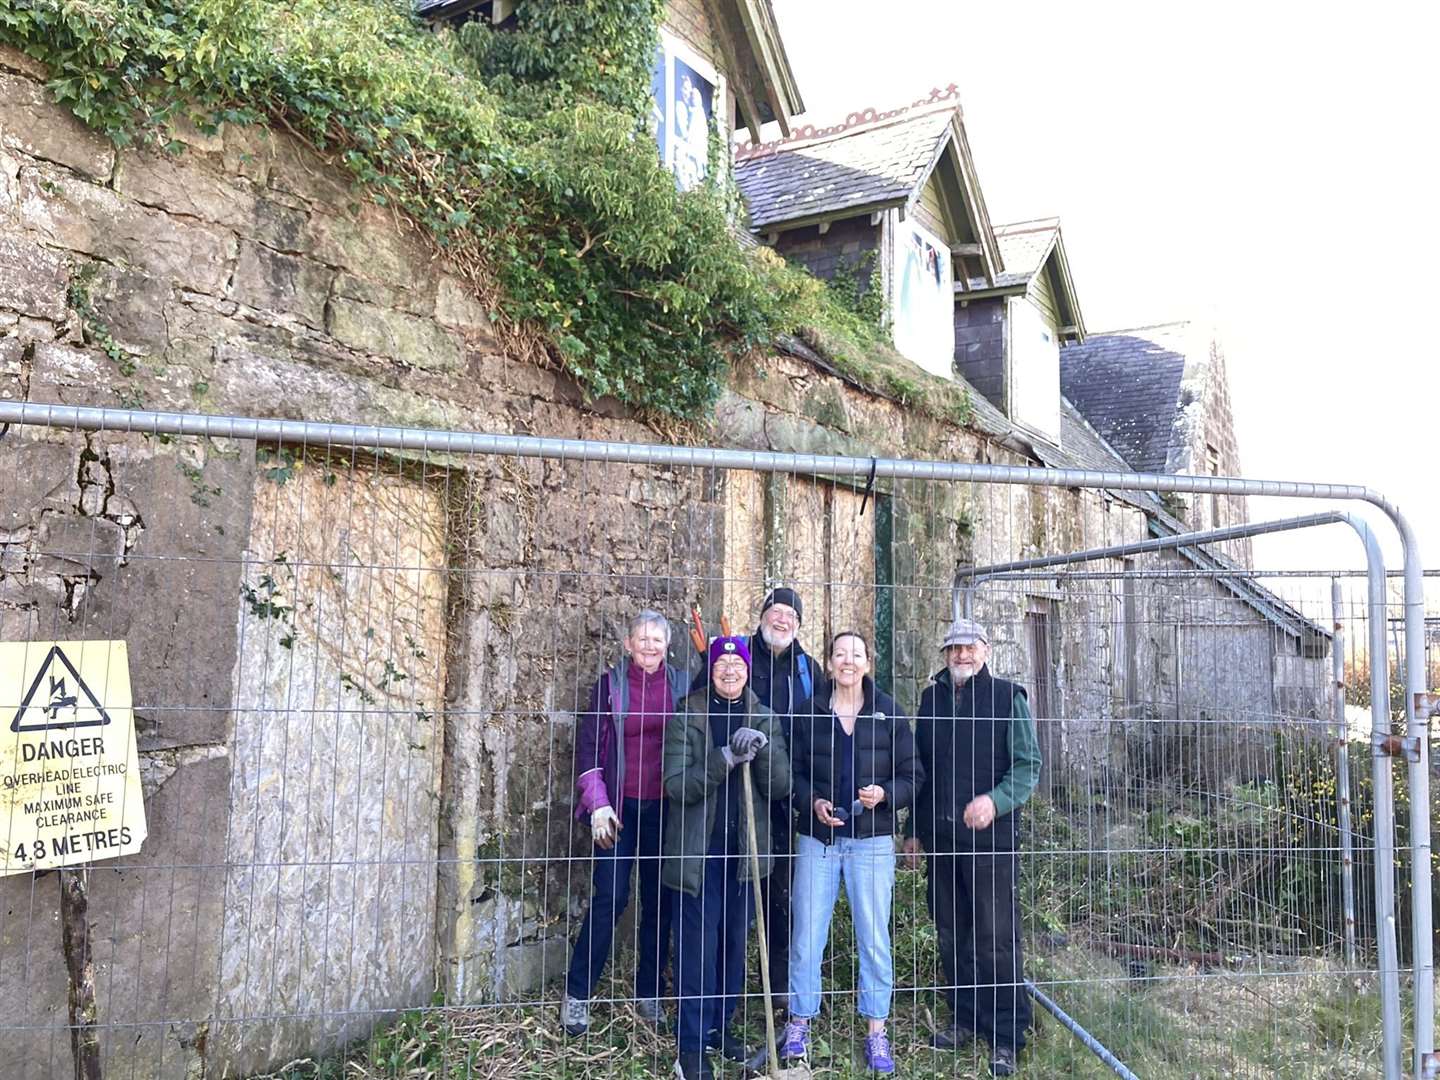 A group of Clyne Heritage Society members recently removed invasive ivy growing on the north wall of the Old Clyne School. From left, Frances Shearer, Linda Graham, Stan Holroyd, Ellen Lindsay and John Alderson.